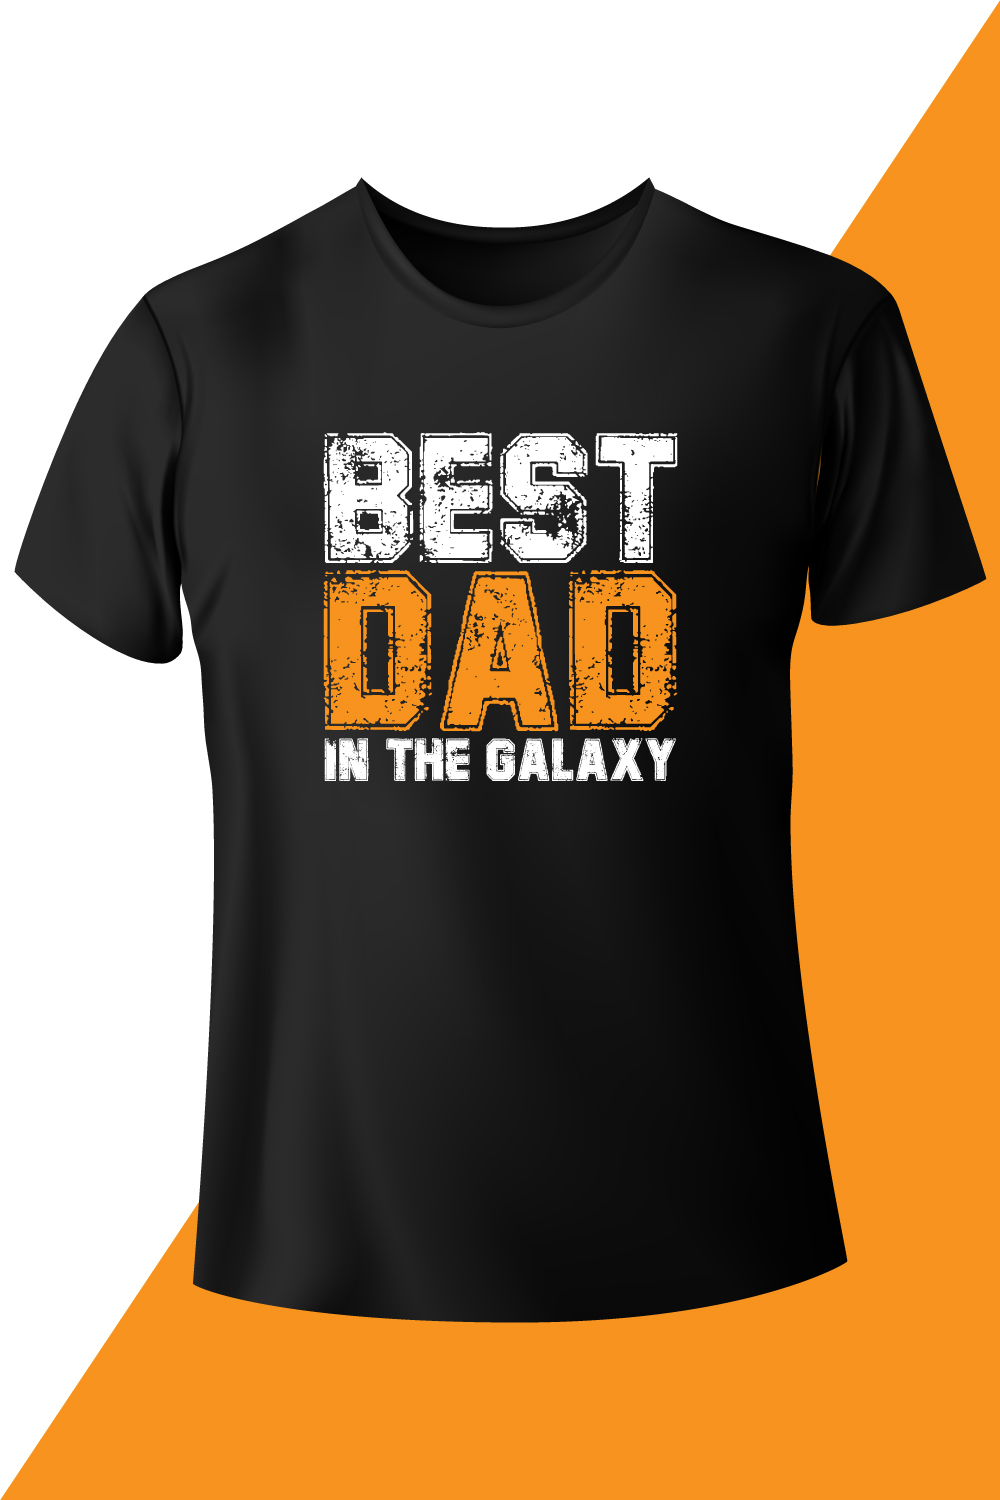 Image with a black t-shirt with an enchanting inscription best dad in the galaxy.